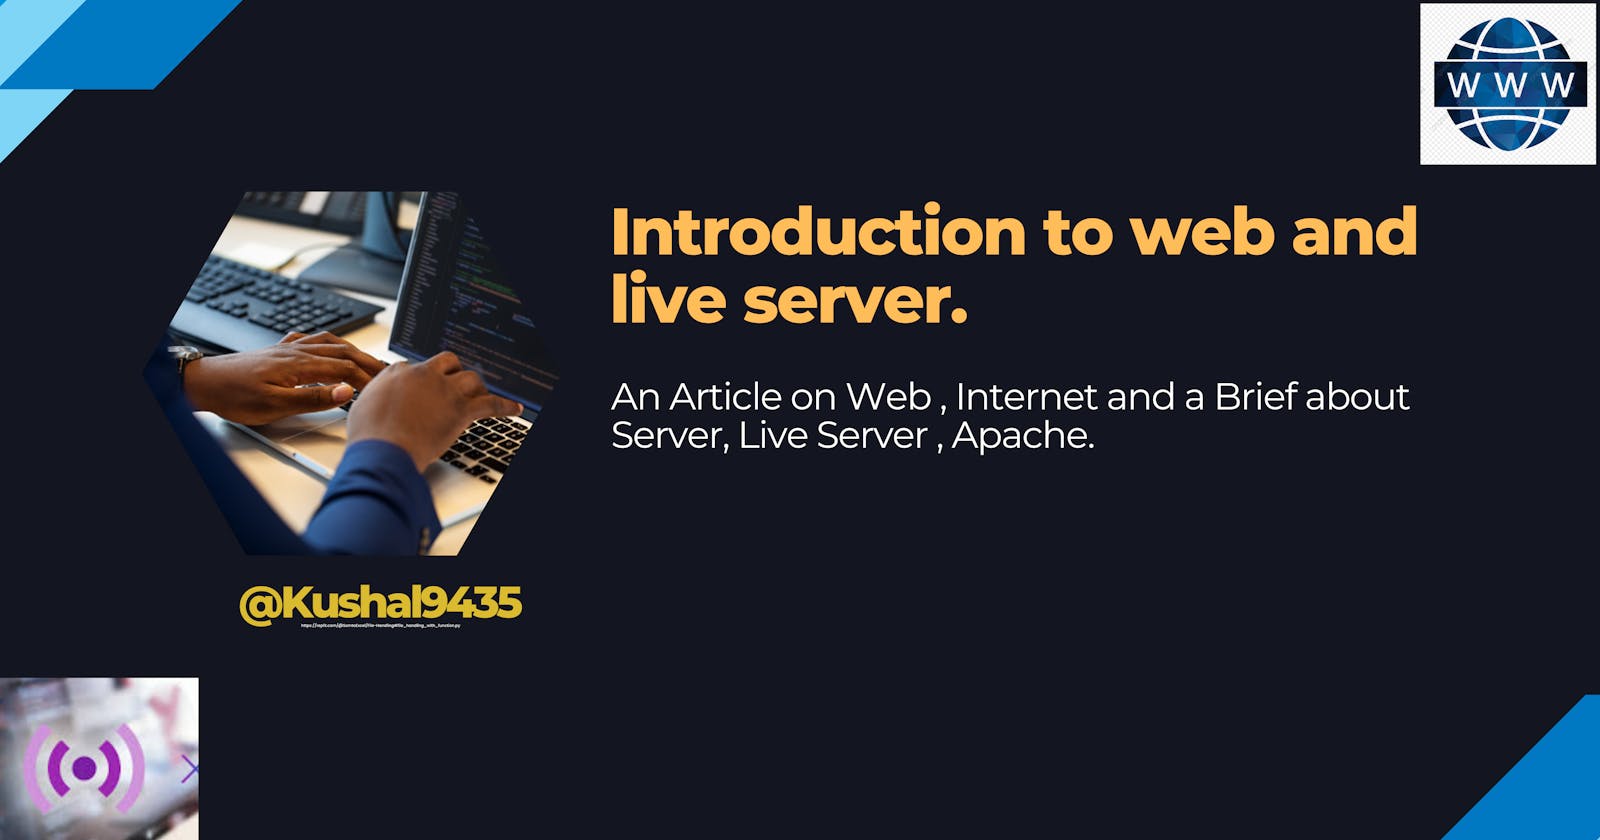 Introduction to web and live server.